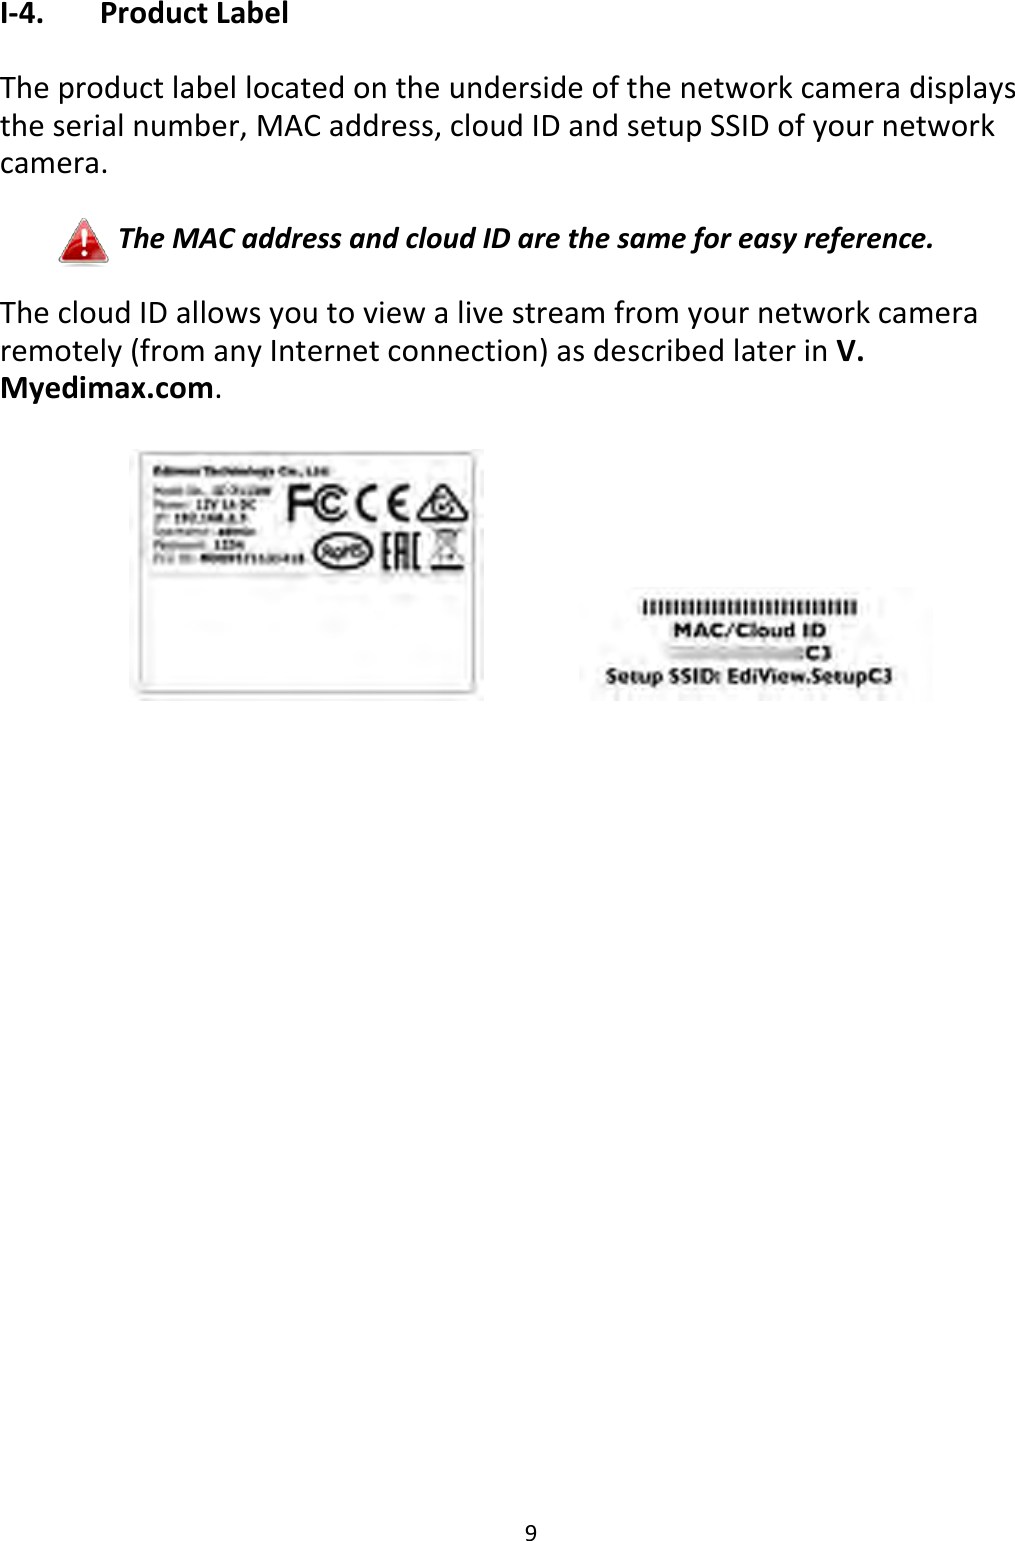 9  I-4.   Product Label  The product label located on the underside of the network camera displays the serial number, MAC address, cloud ID and setup SSID of your network camera.  The MAC address and cloud ID are the same for easy reference.  The cloud ID allows you to view a live stream from your network camera remotely (from any Internet connection) as described later in V. Myedimax.com.       